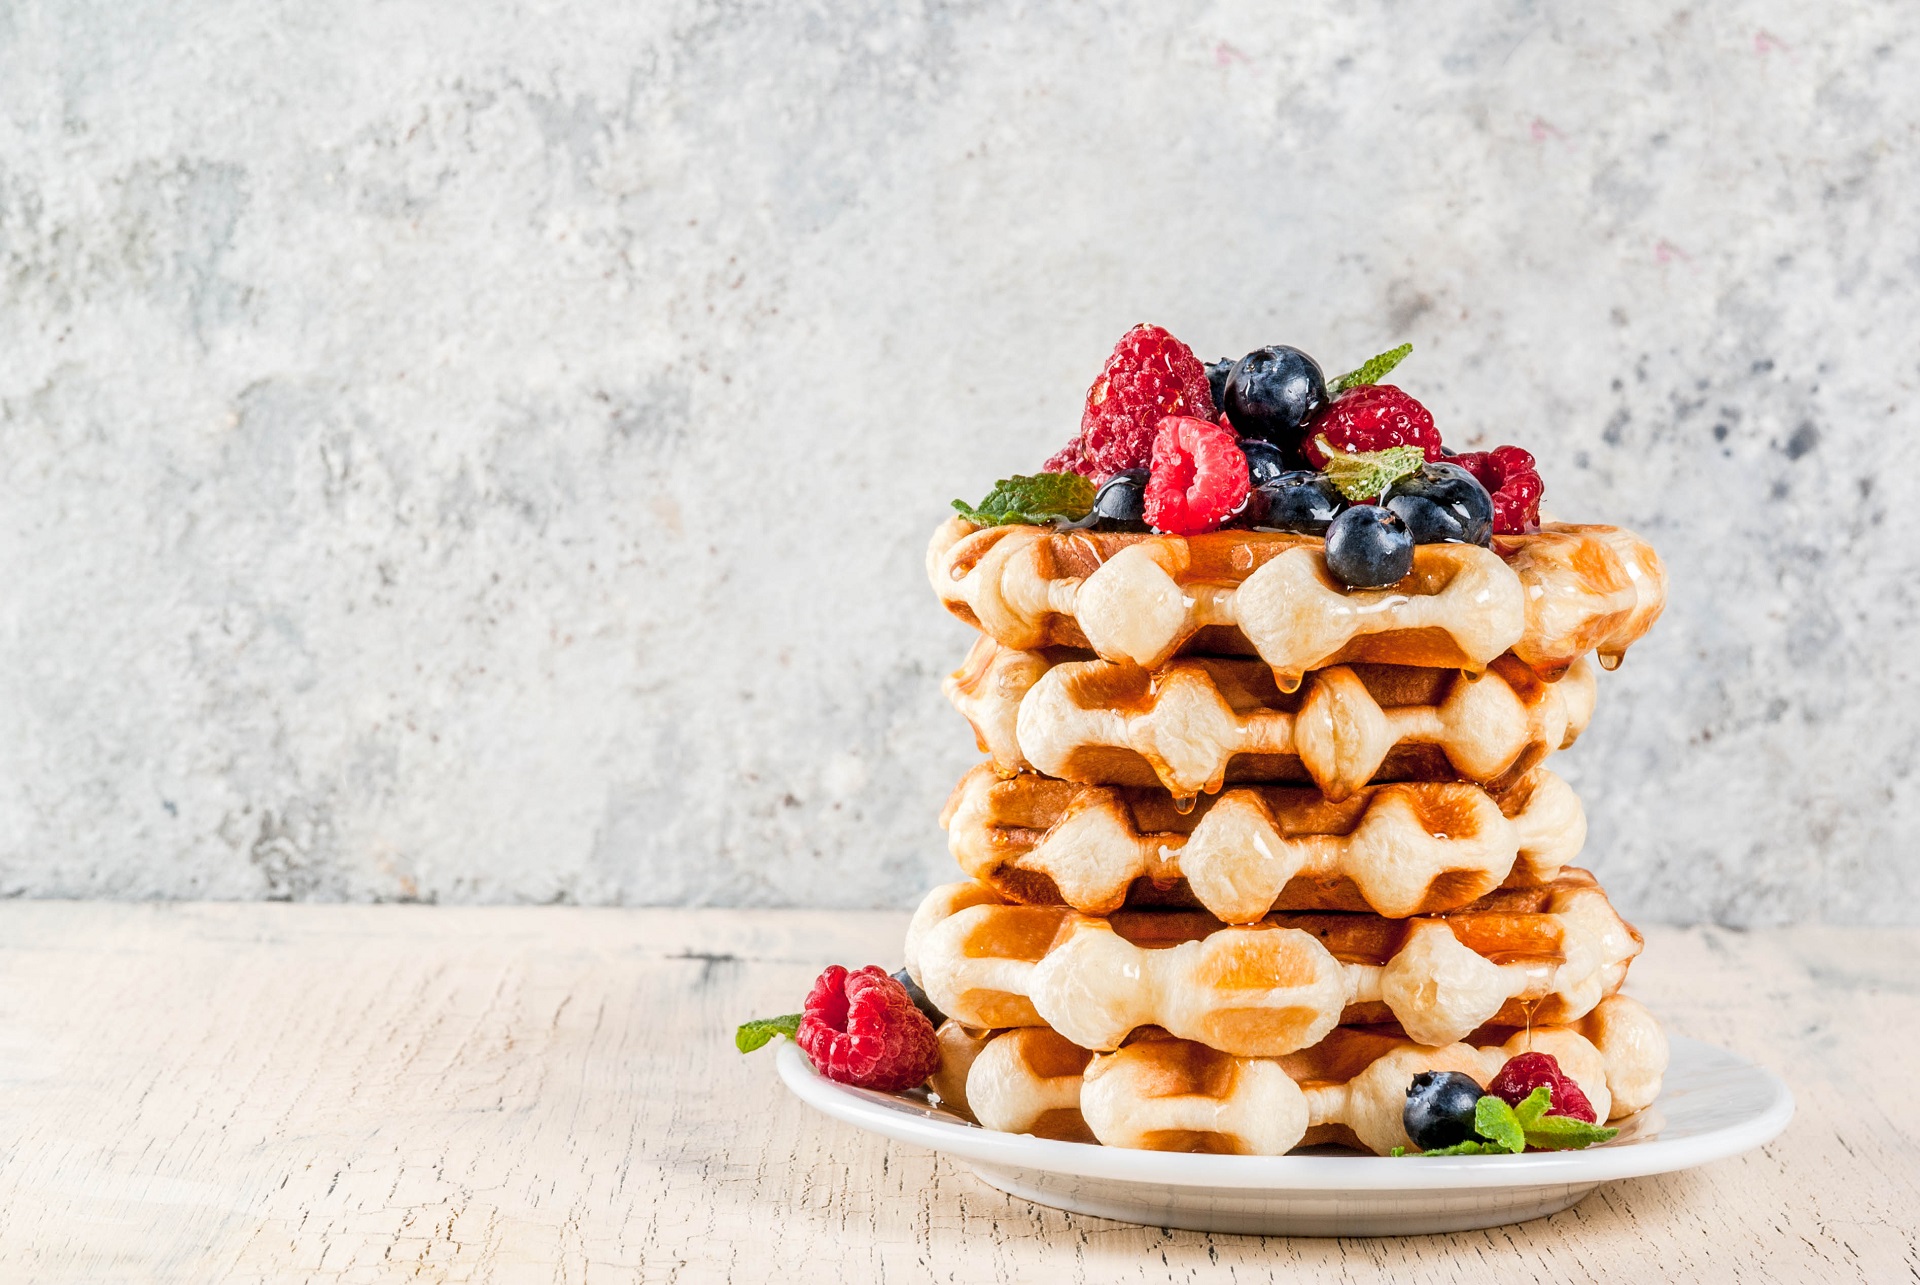 Waffle stack to replace the traditional birthday cake. 